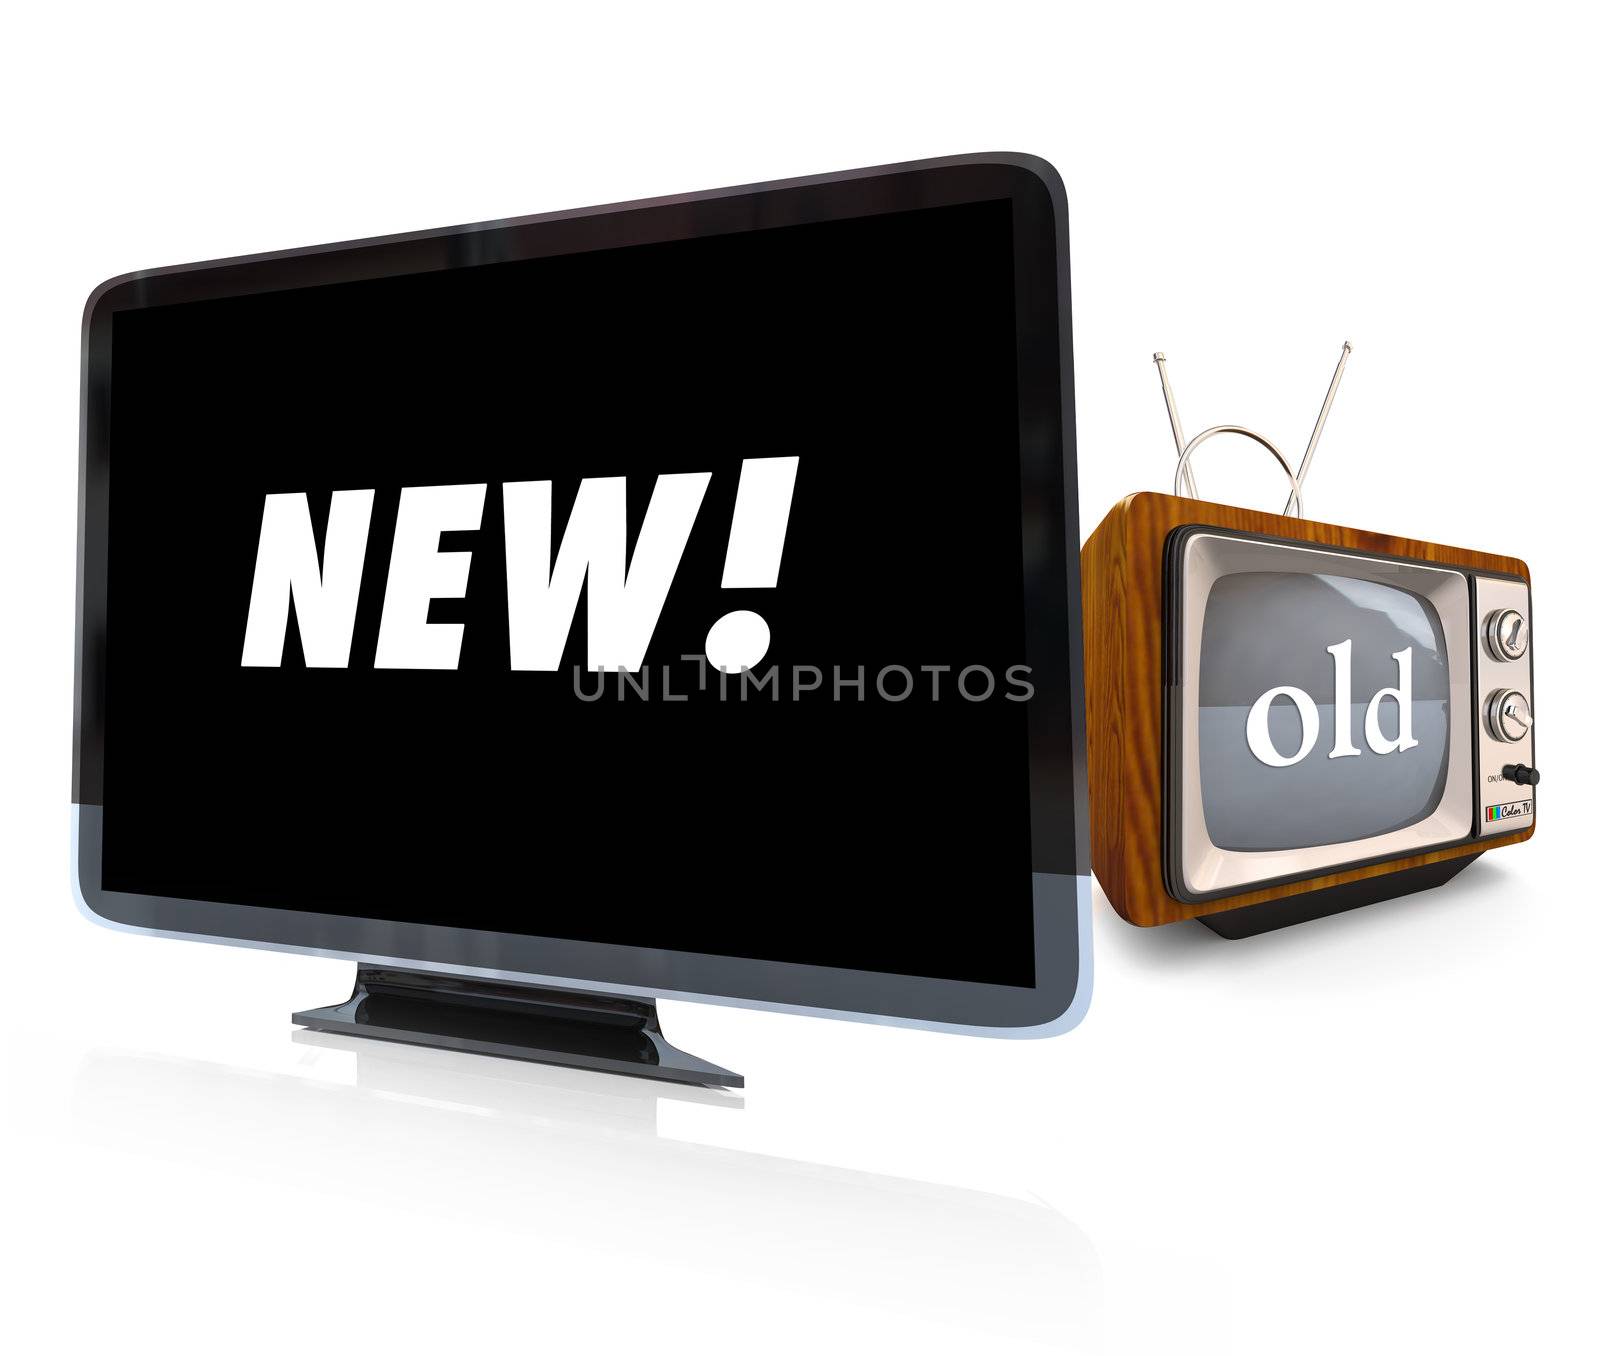 Comparing Old CRT TV vs new HDTV Television by iQoncept